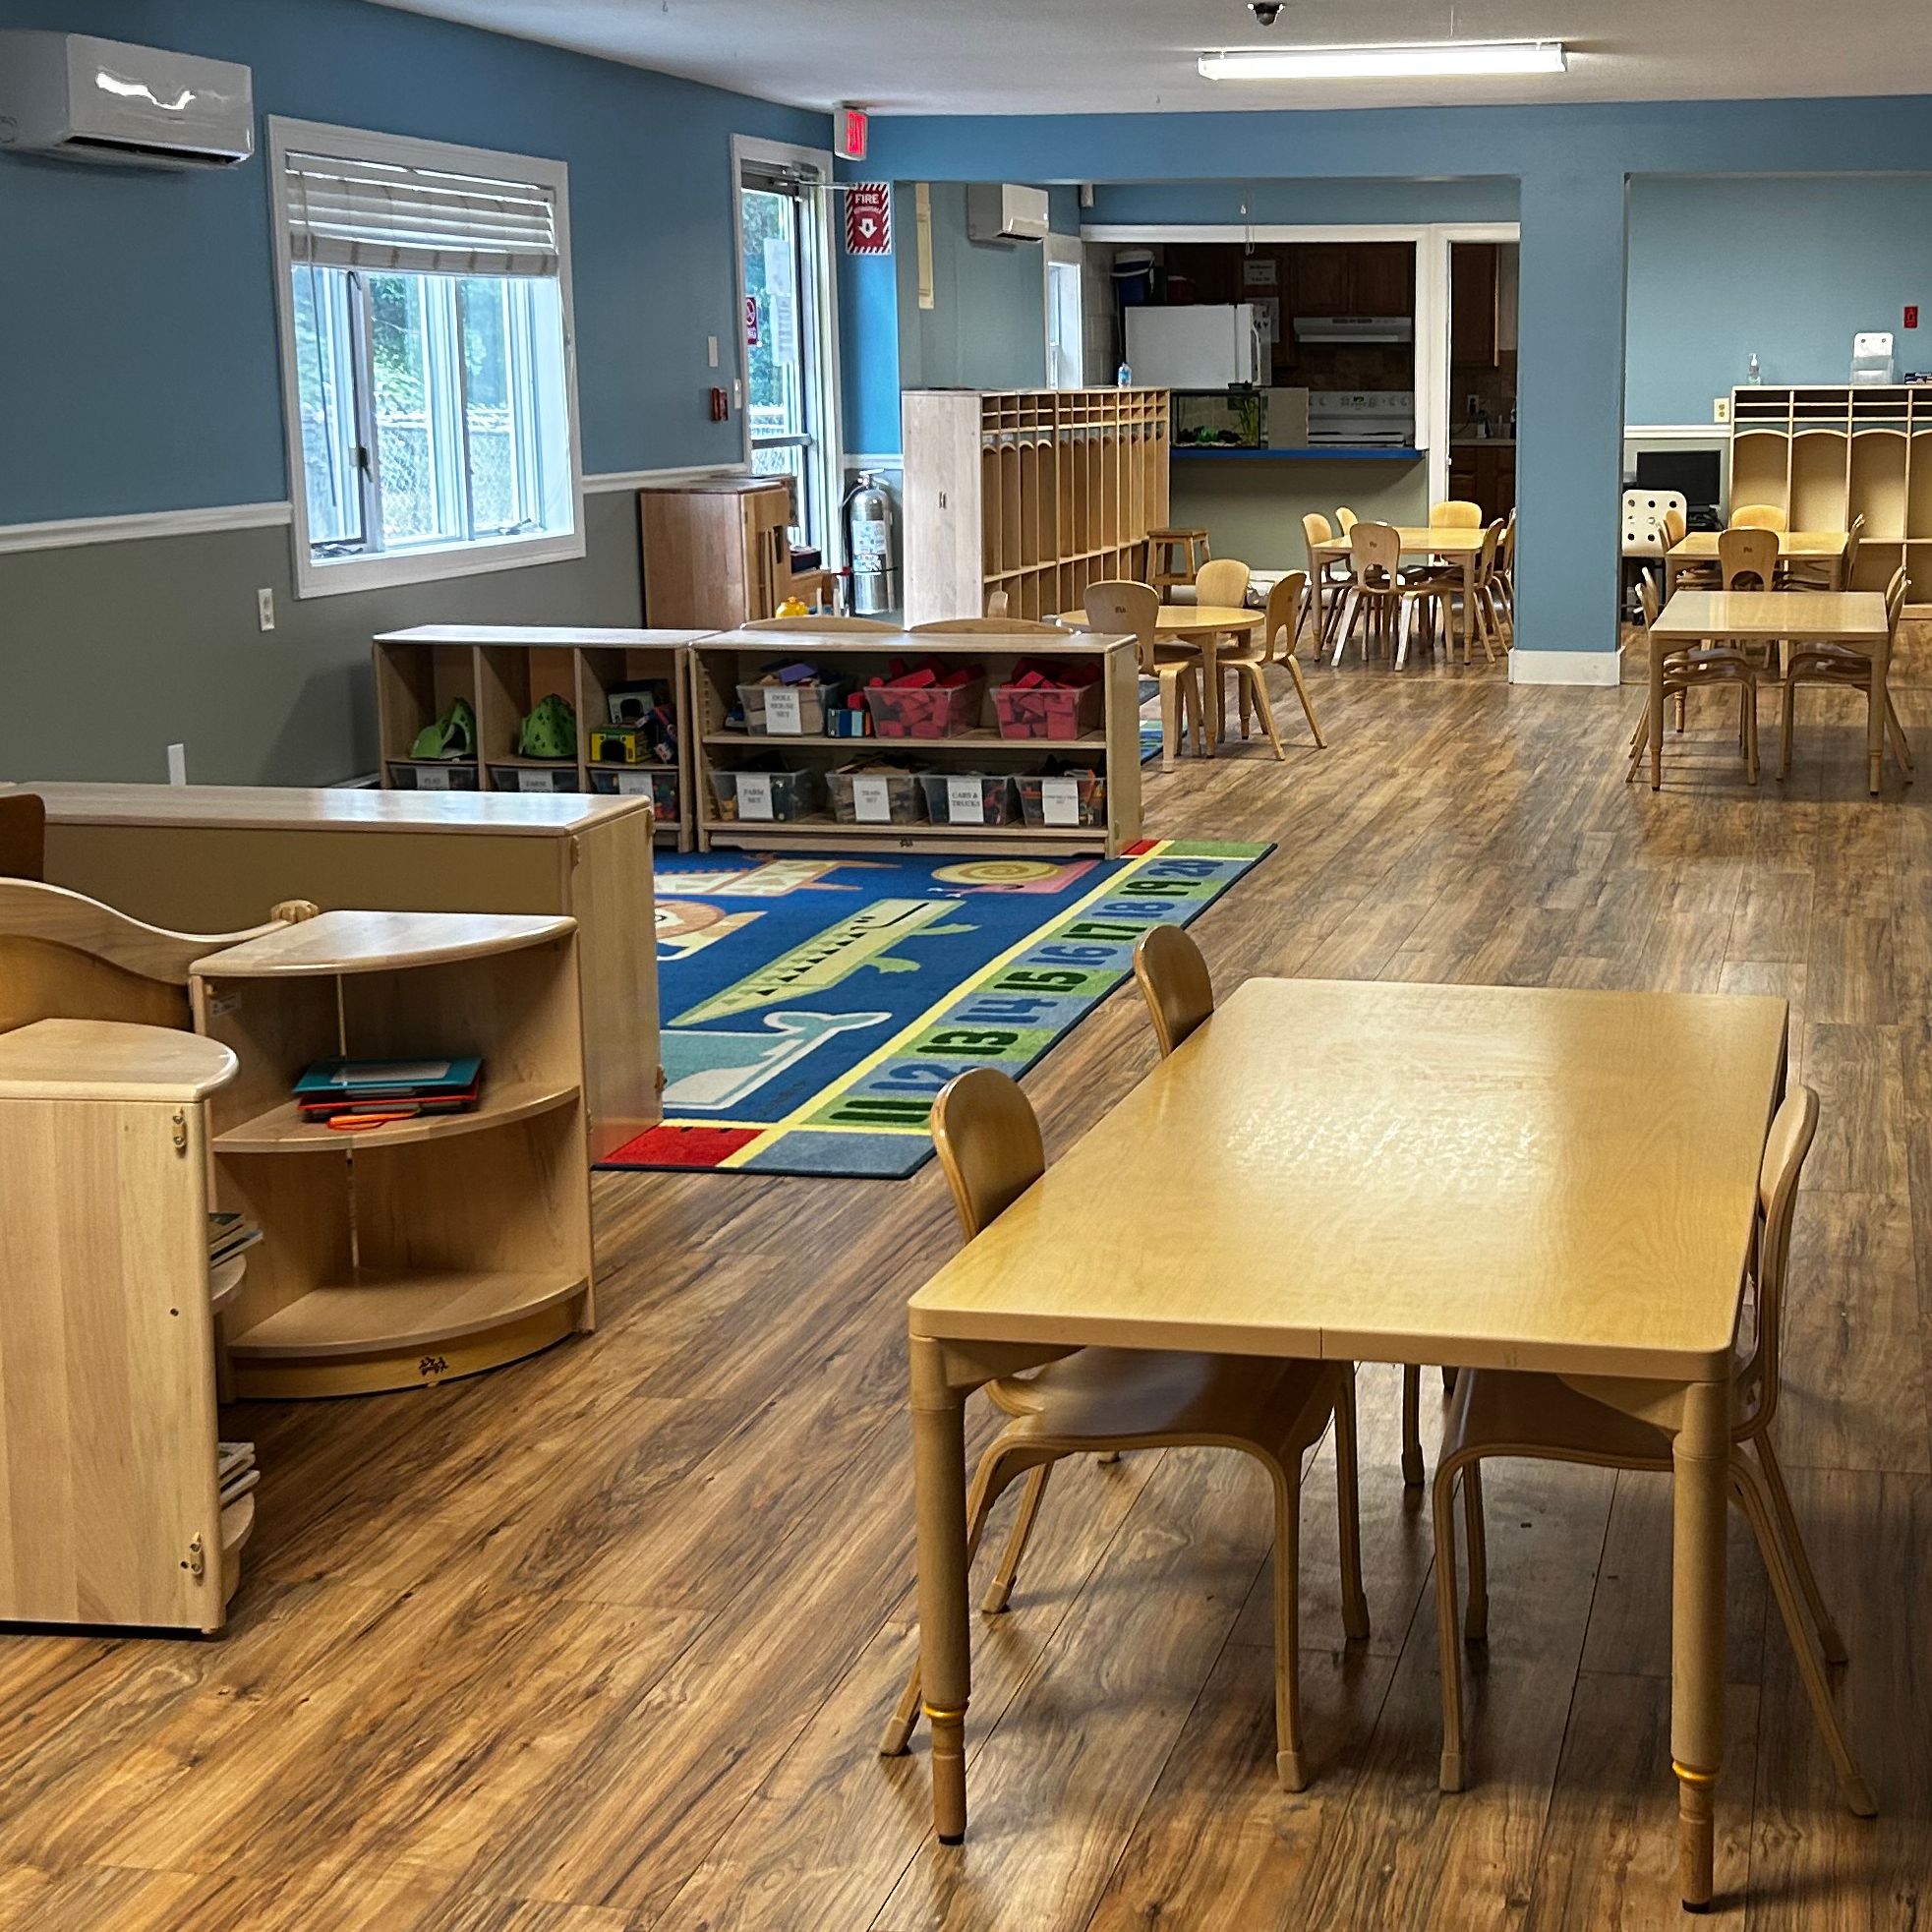 Early Childhood Center in South Kingstown, Rhode Island